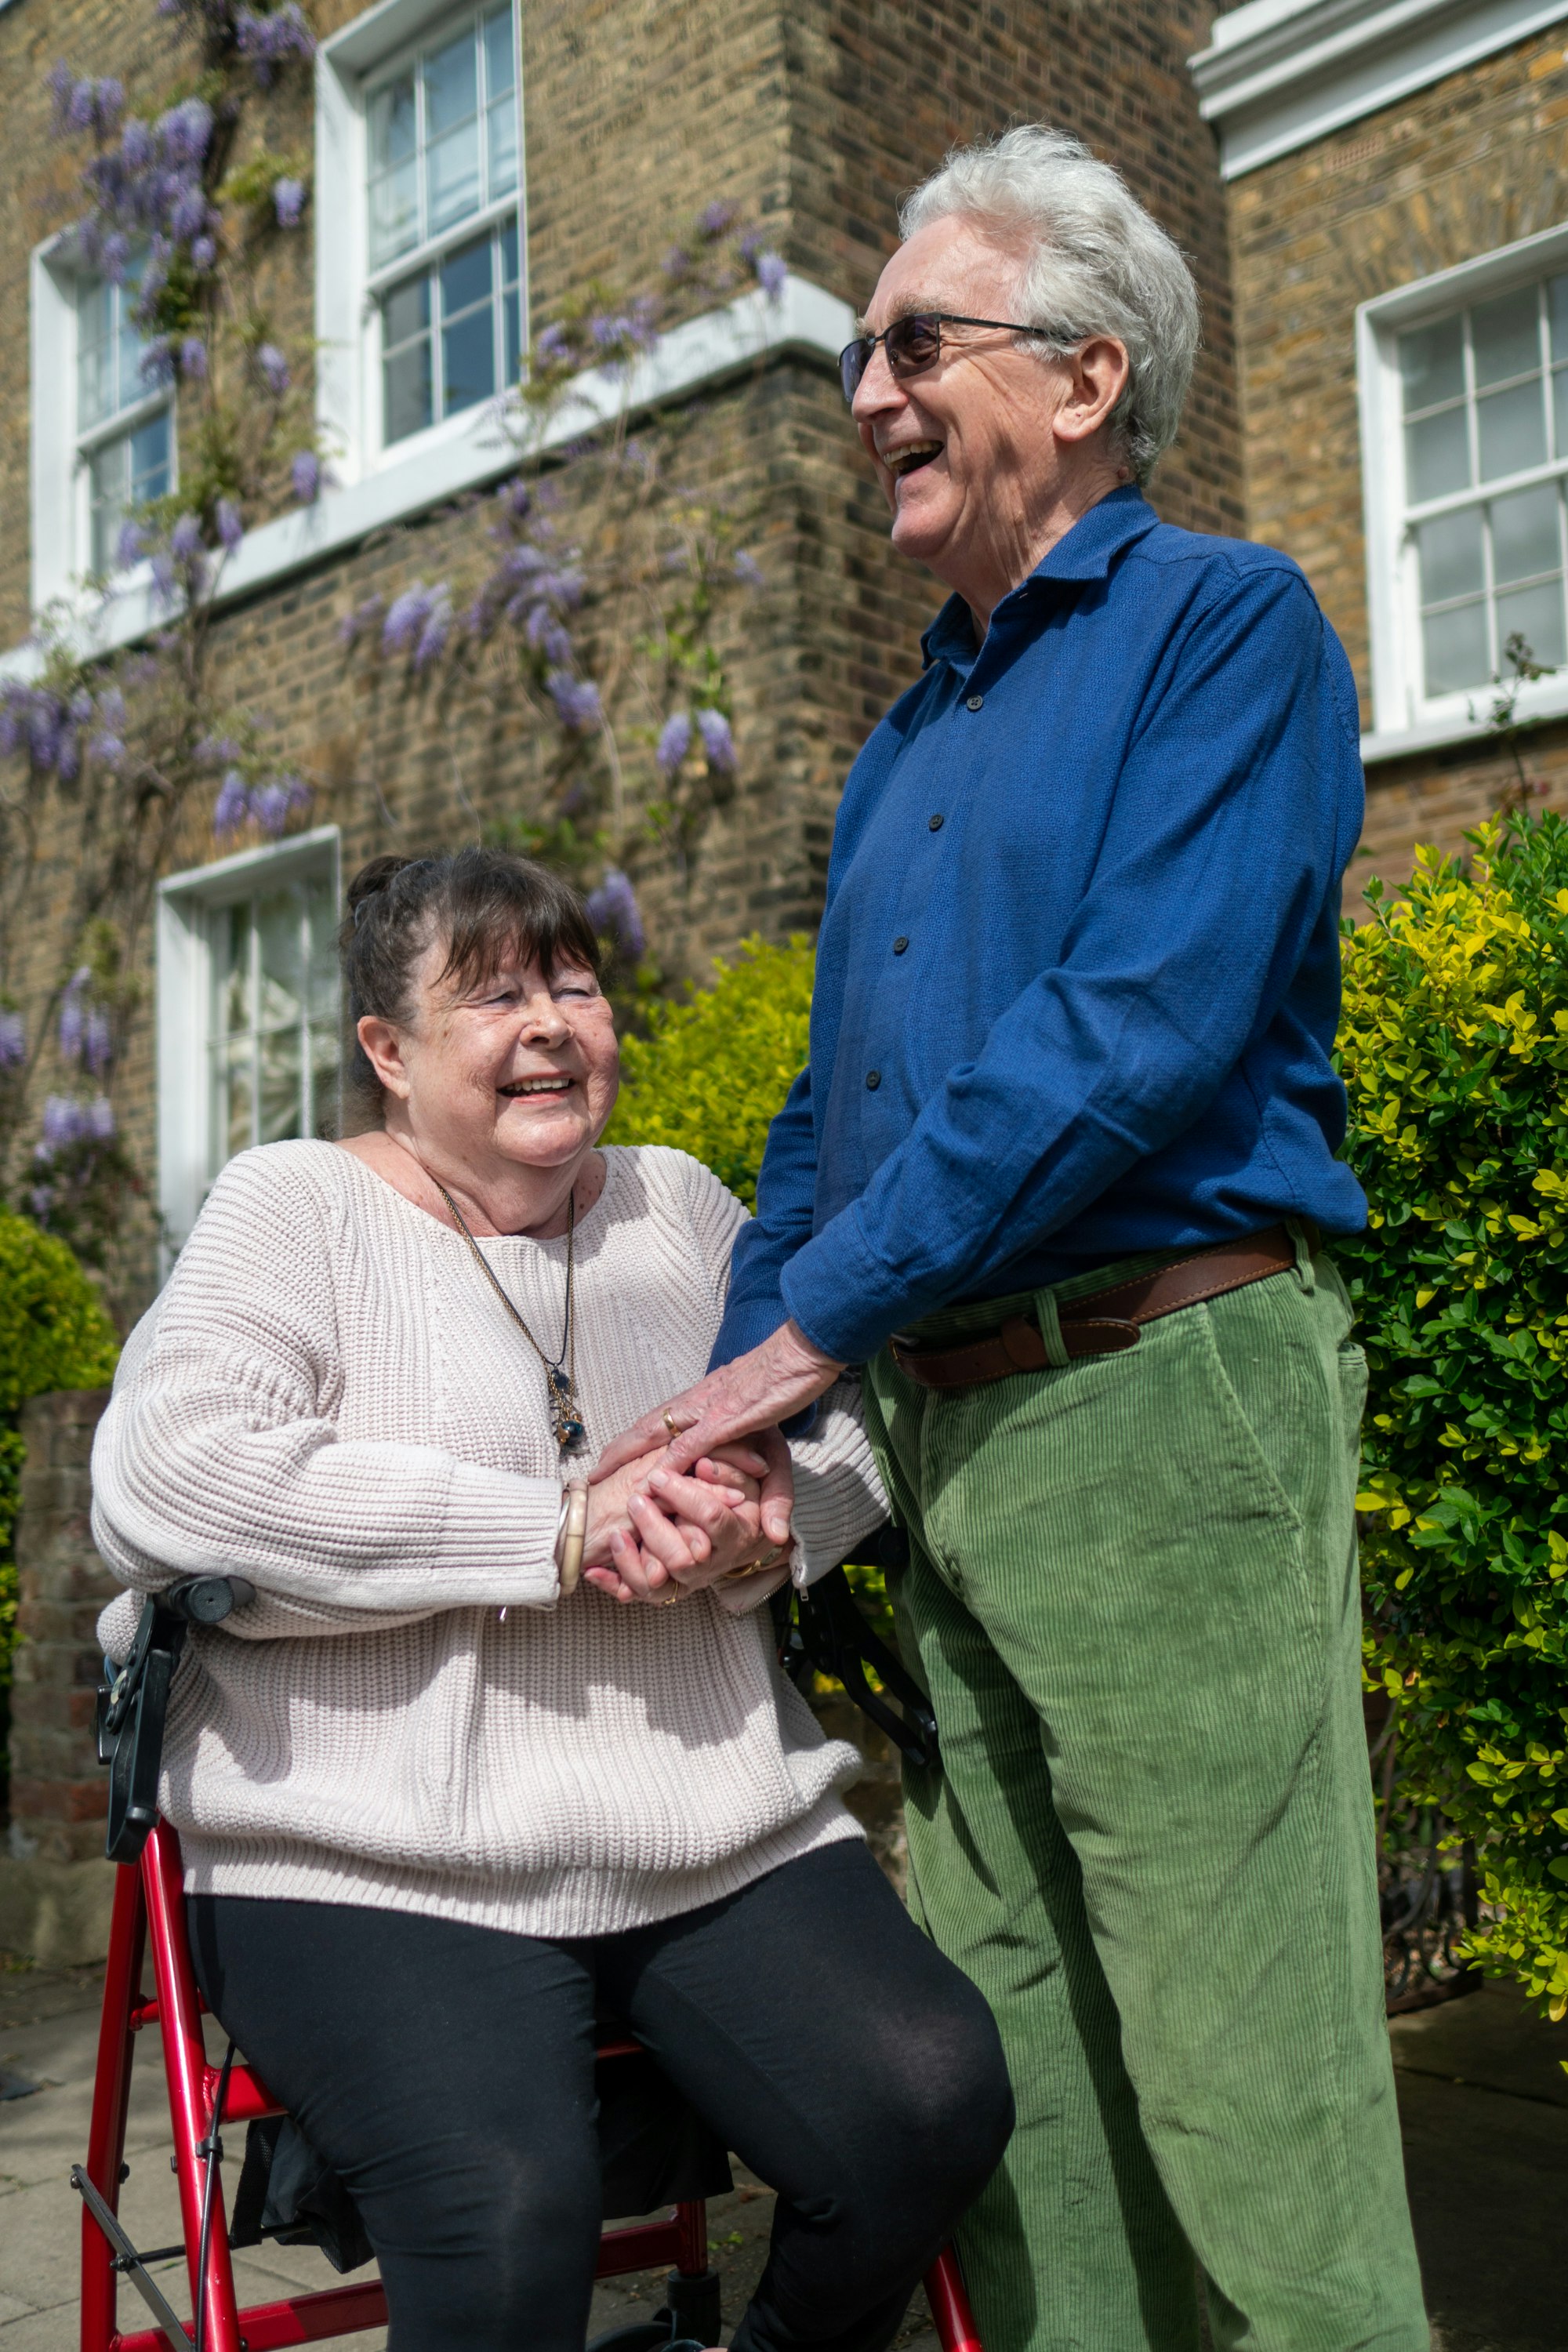 An older couple with disabilities hold hands outdoors.